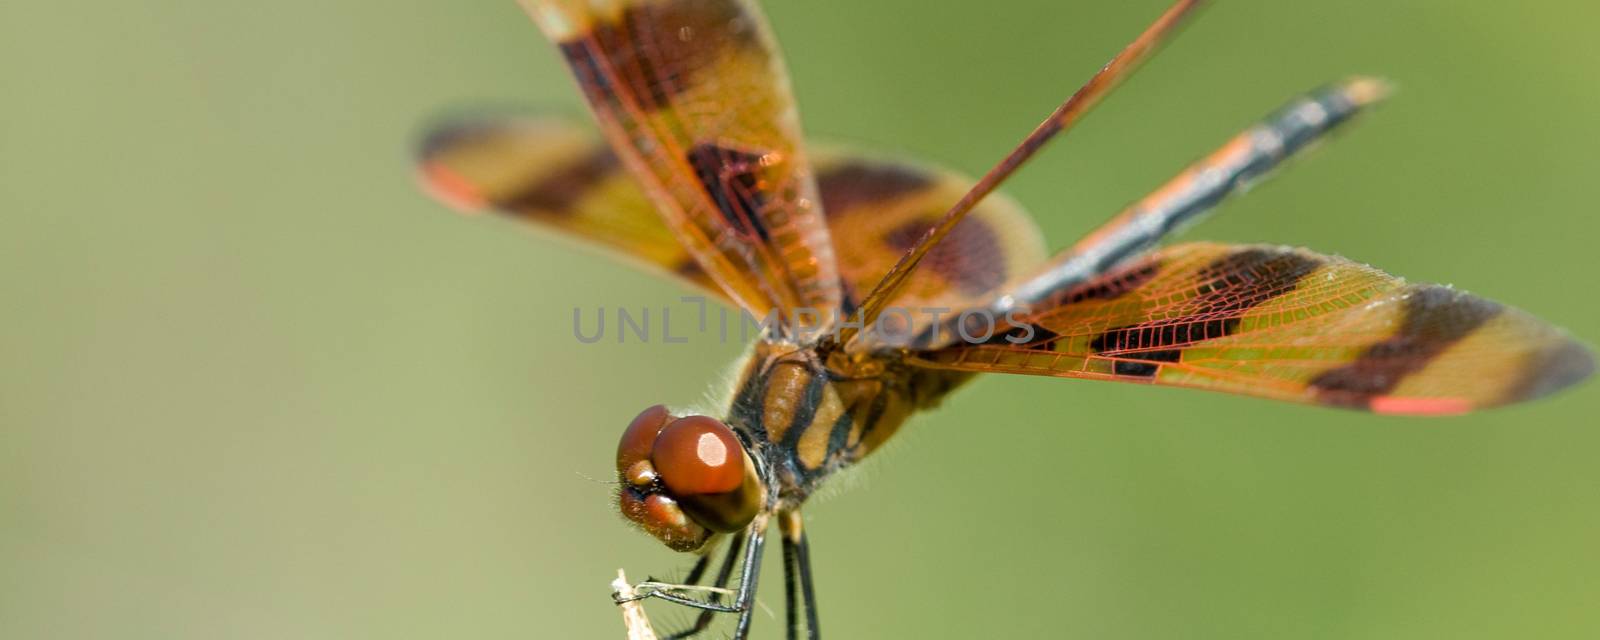 Macro view of brown dragonfly with spread wings, green nature background.